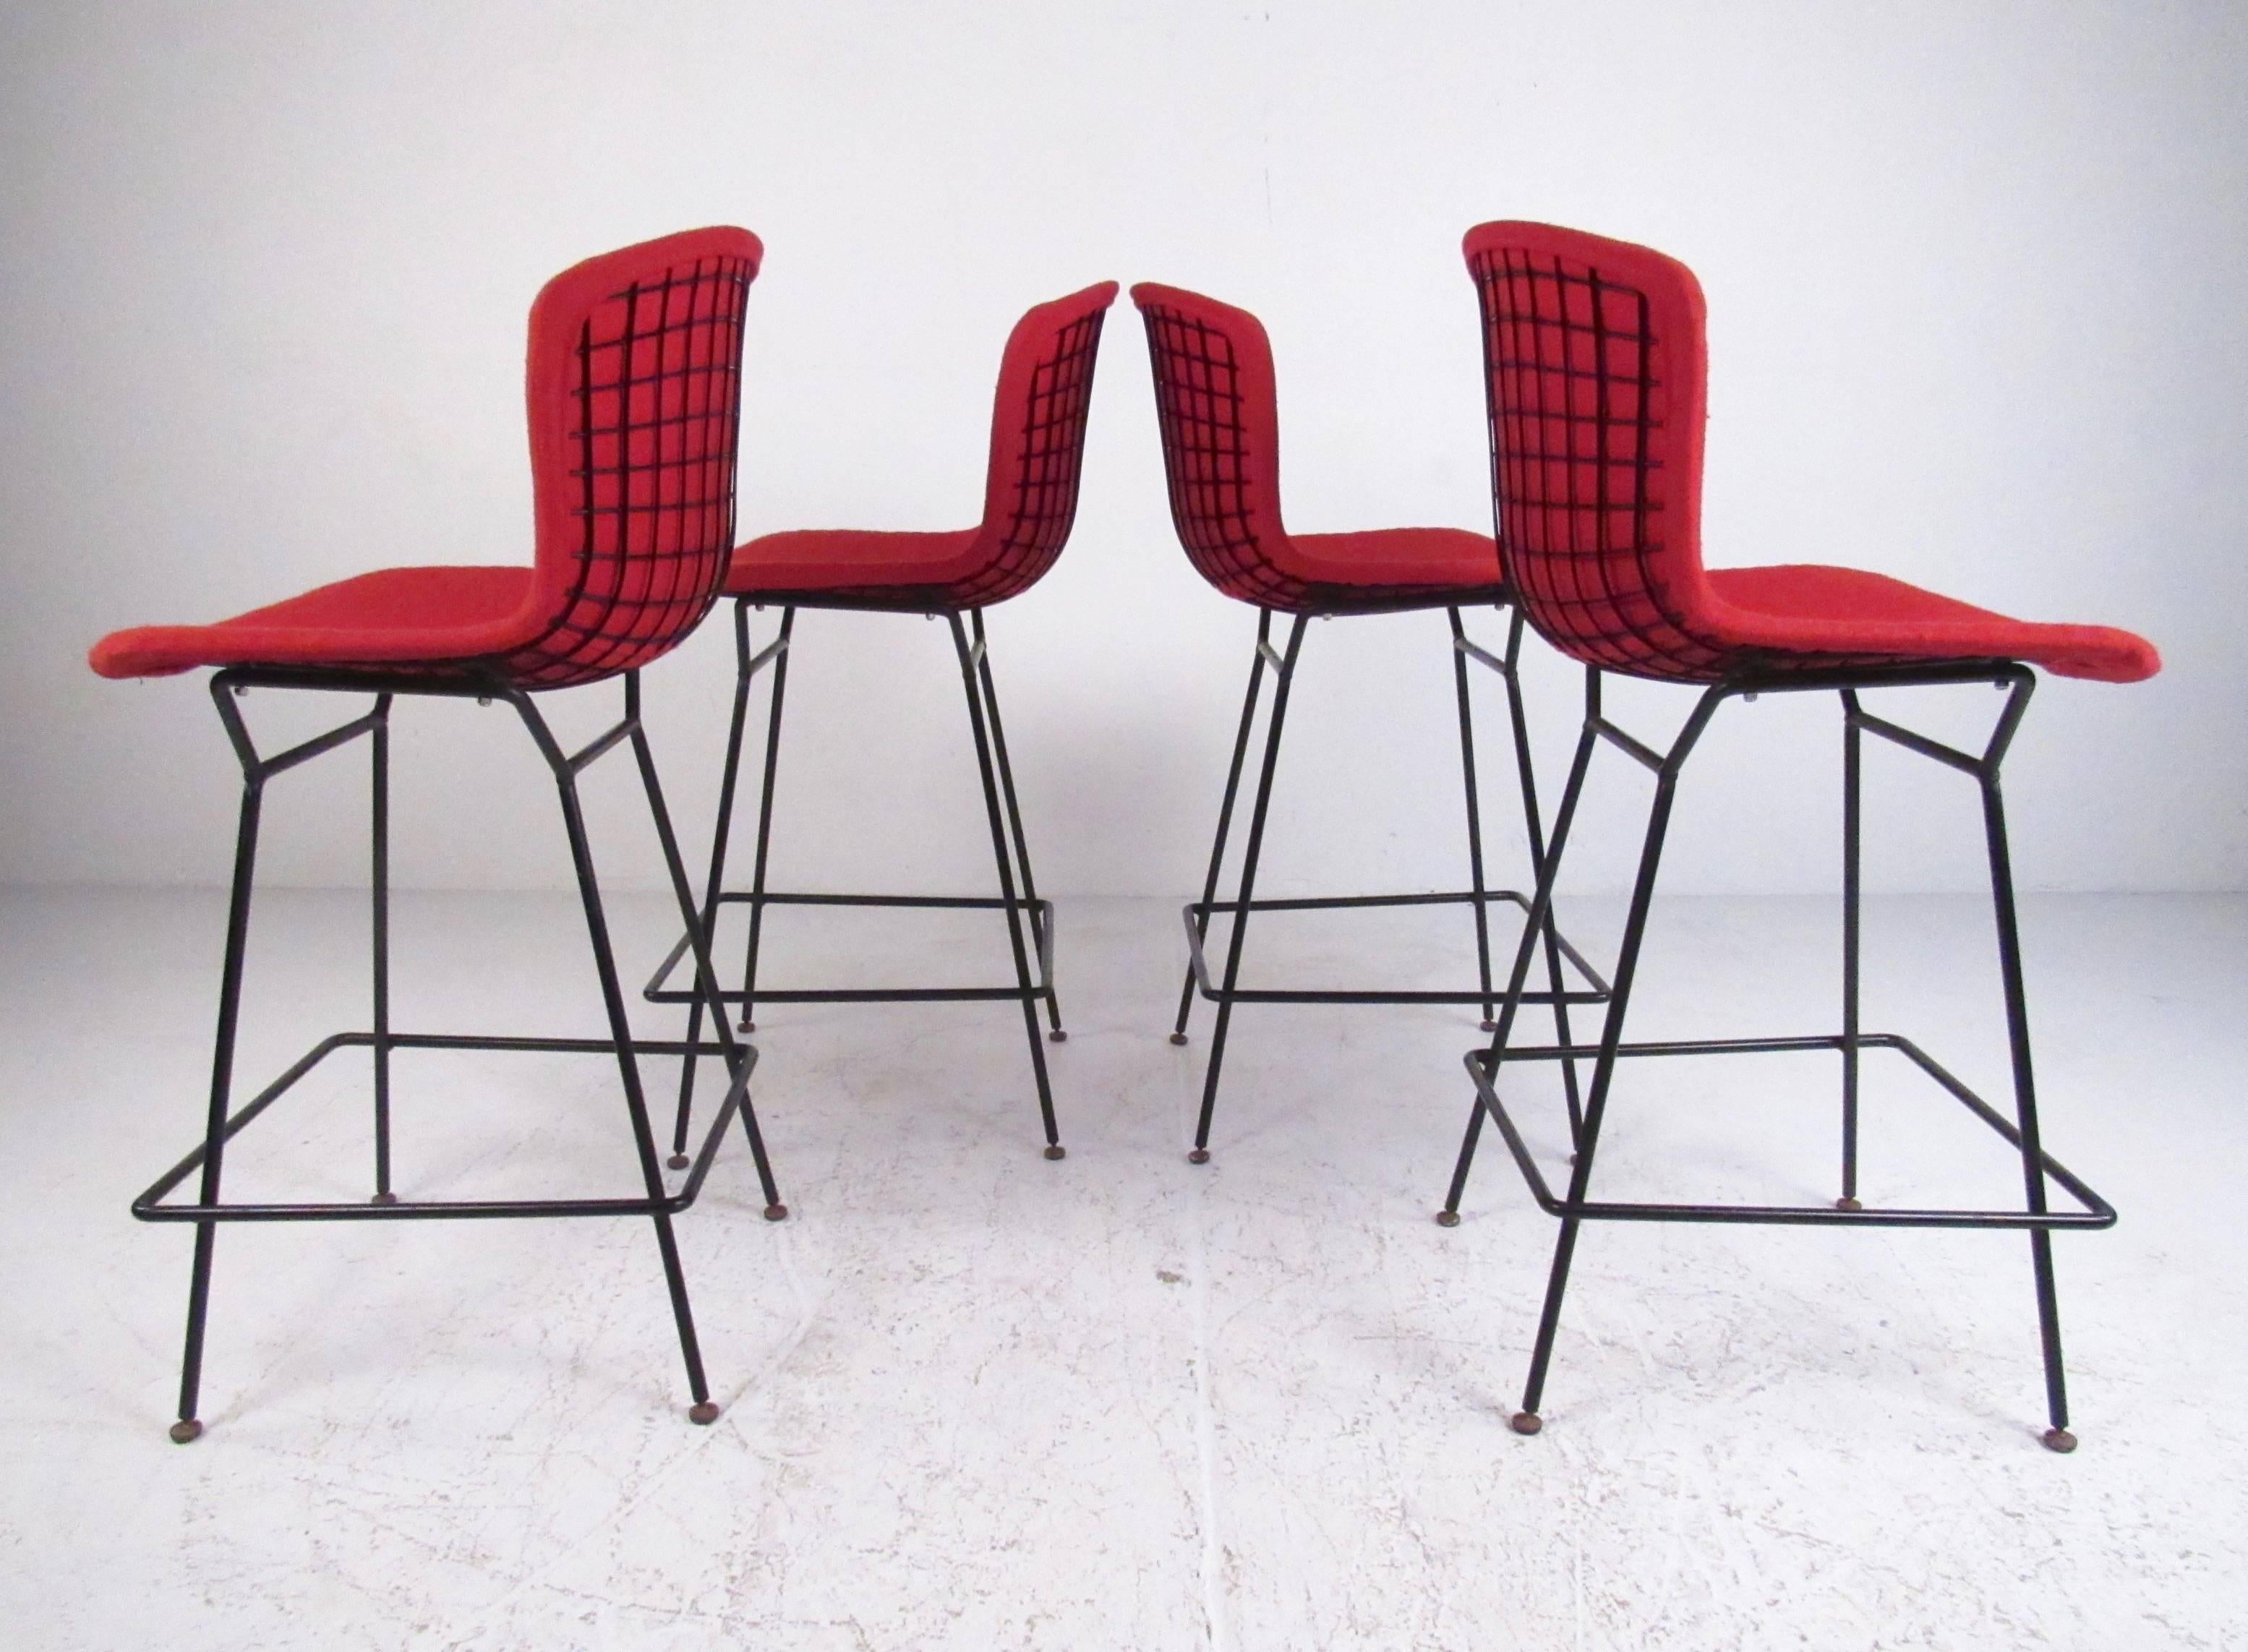 This comfortable set of four counter height barstools feature the shapely steel wire frames made popular by designer Harry Bertoia for Knoll Associates. The bonded black finish is wonderfully complimented by the vintage fabric seat covers. Please